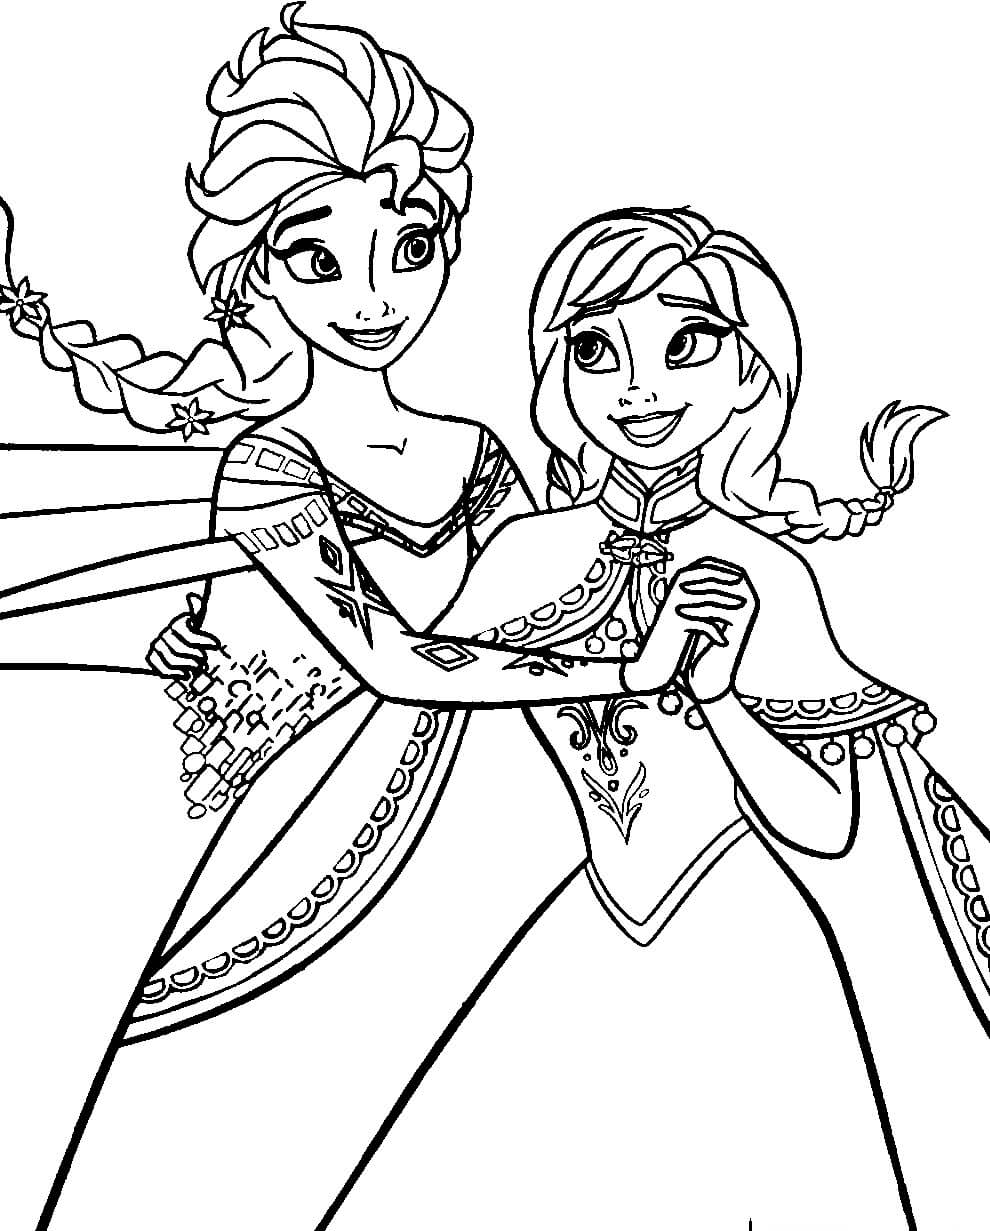 Printable Elsa and Anna Disney Coloring Pages